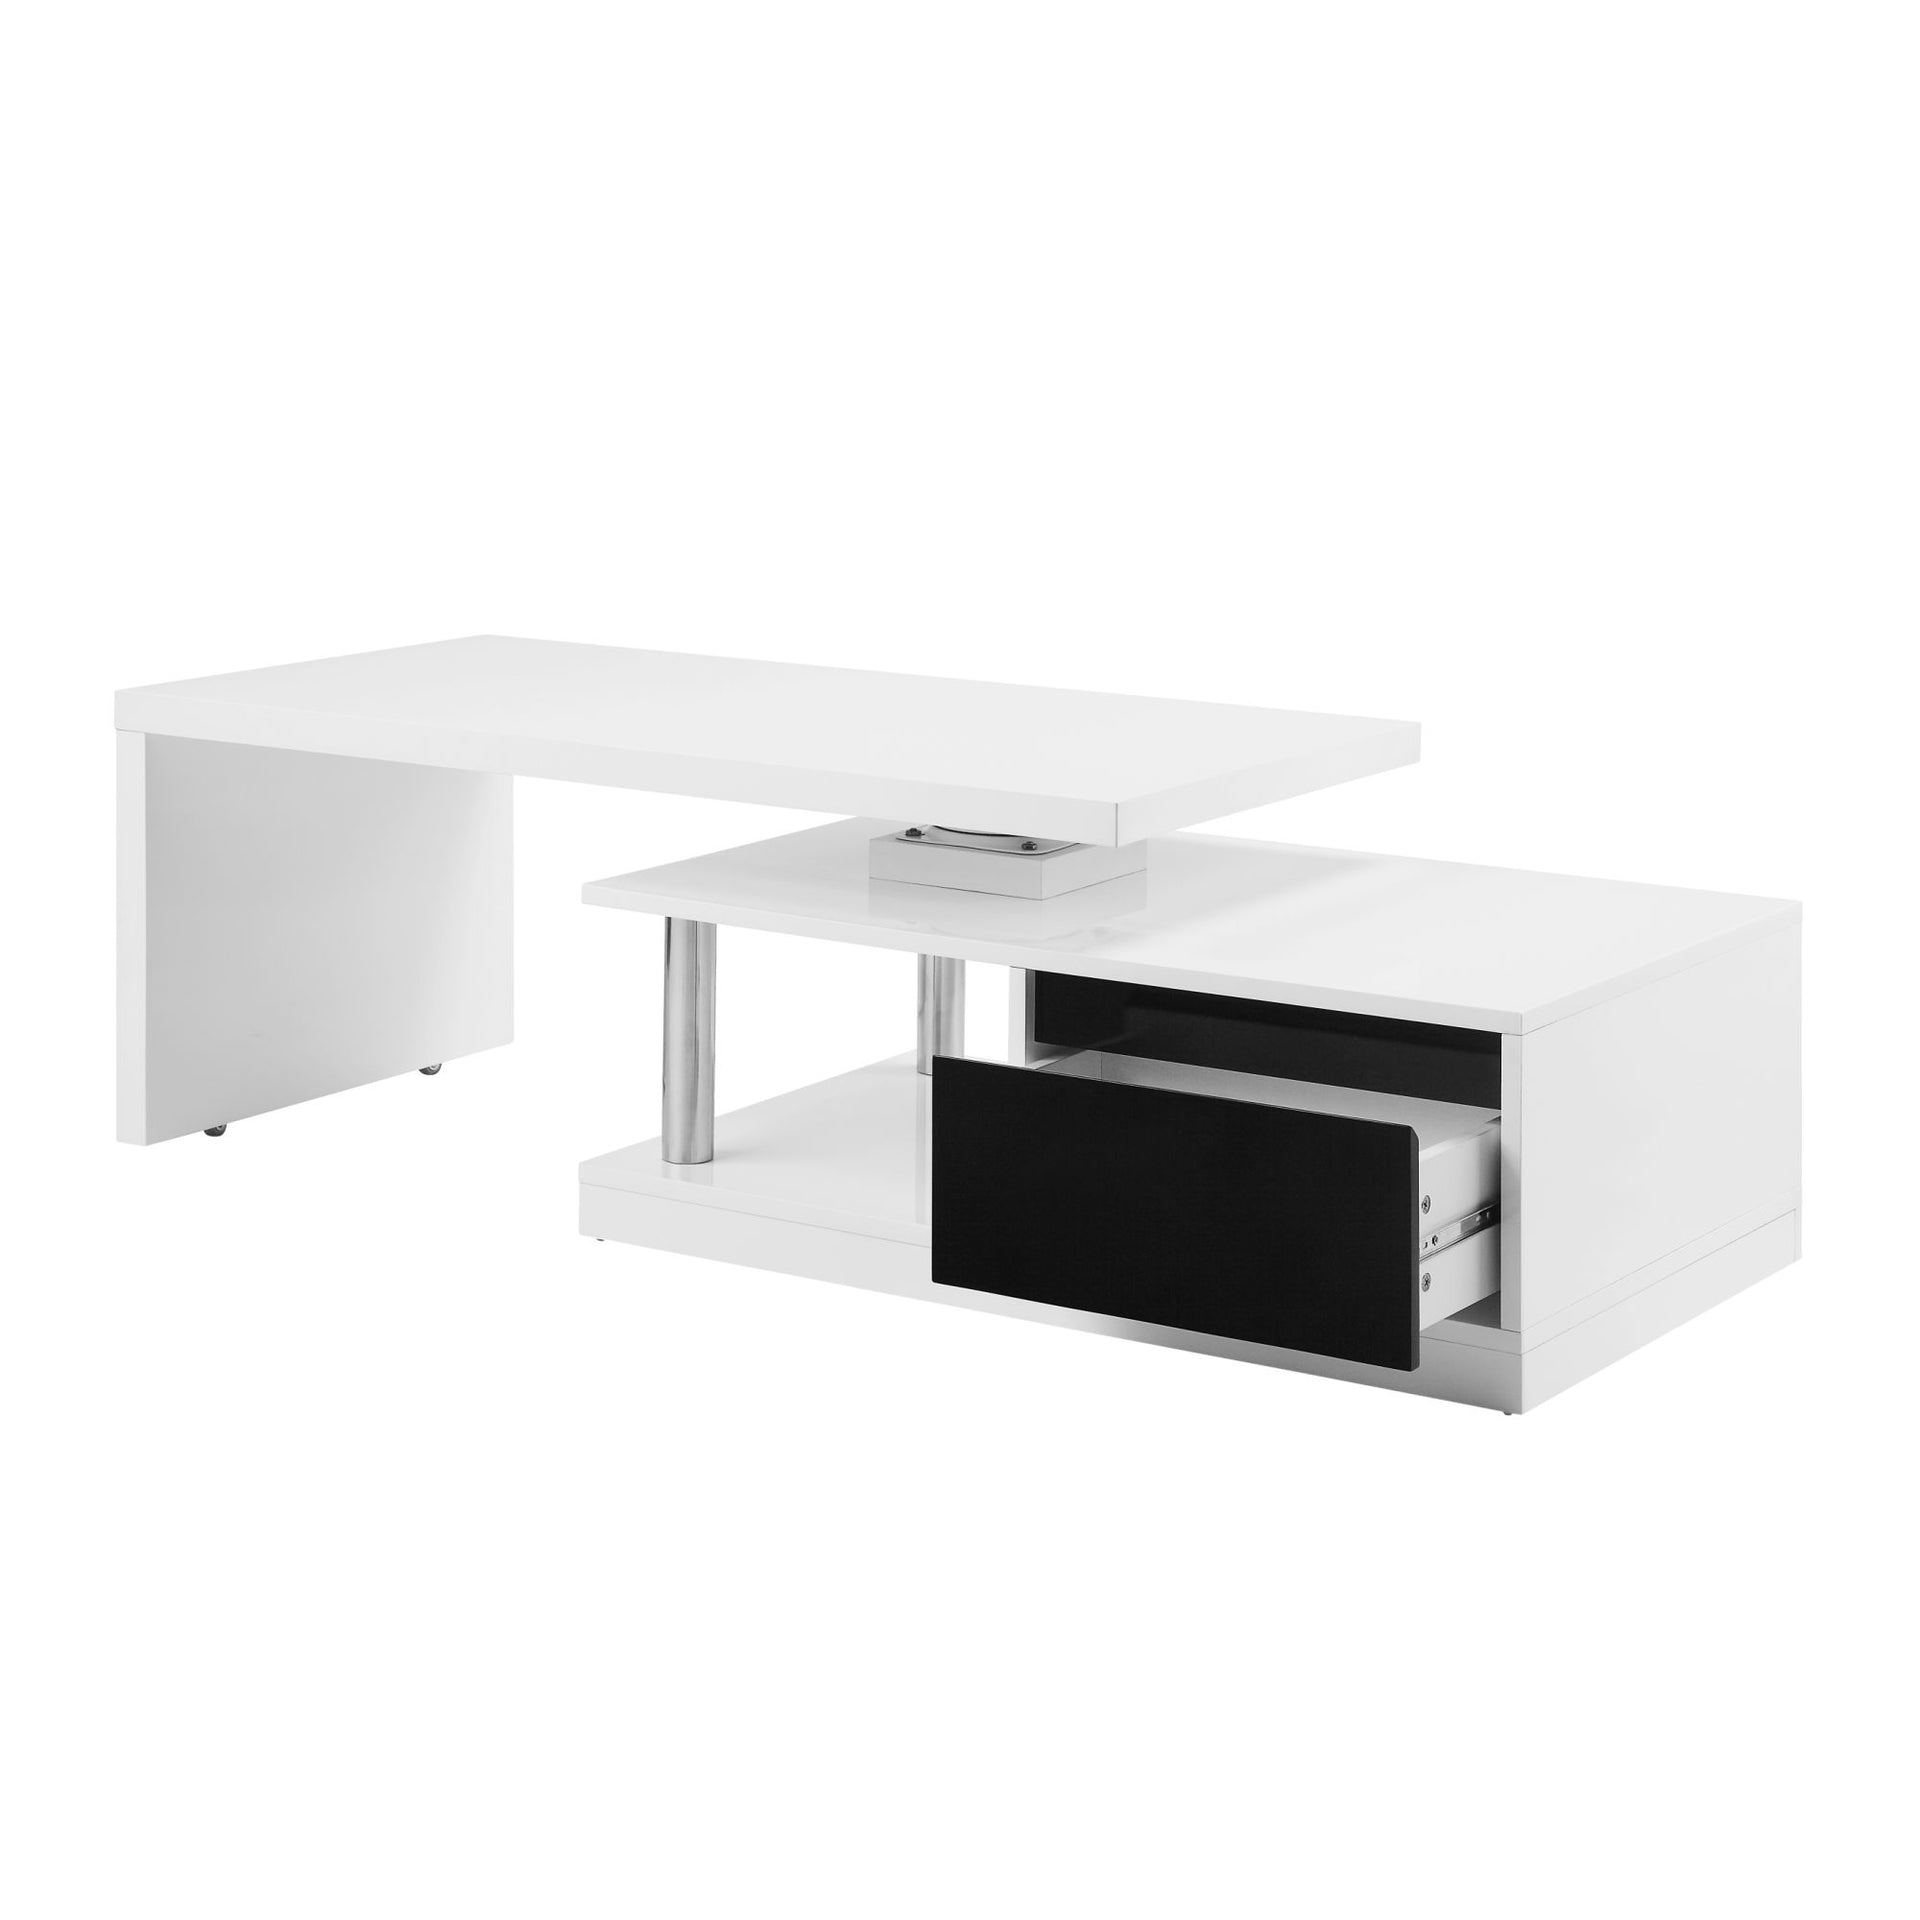 Coffee Table w/Swivel Top in White & Black High Gloss Finish LV00997